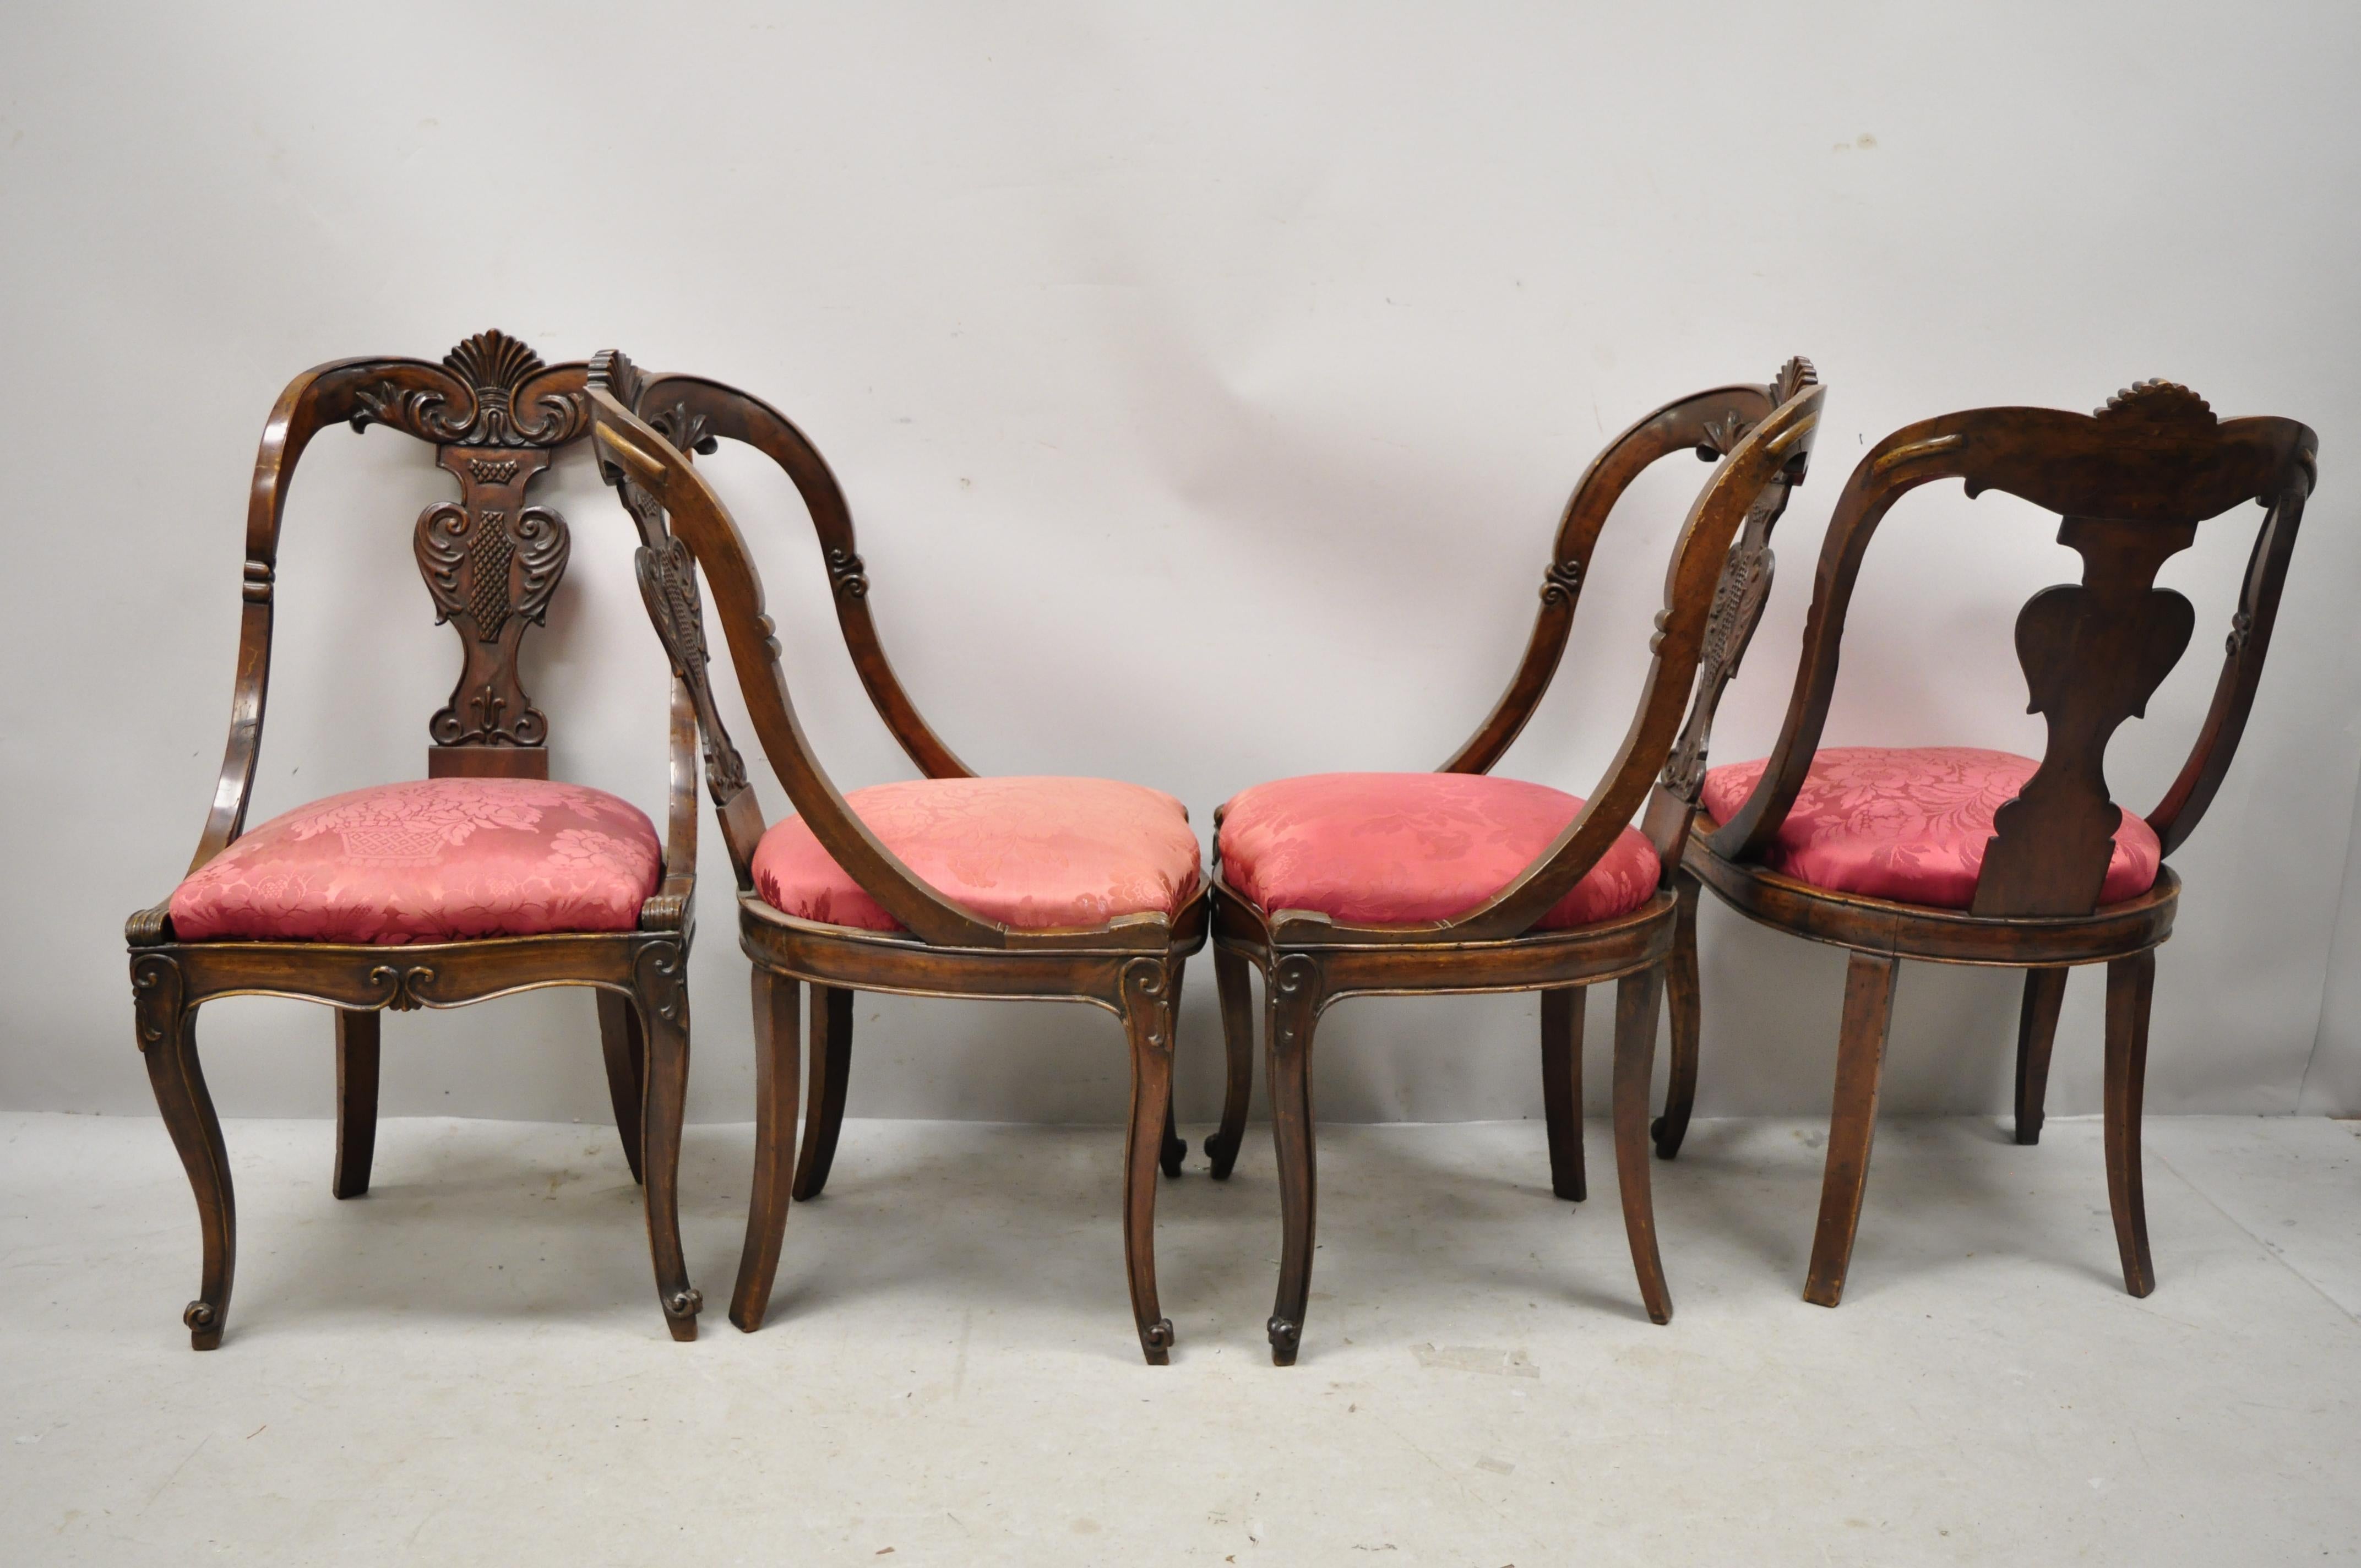 19th Century English Regency Carved Mahogany Curved Back Dining Side Chairs, Set of 4